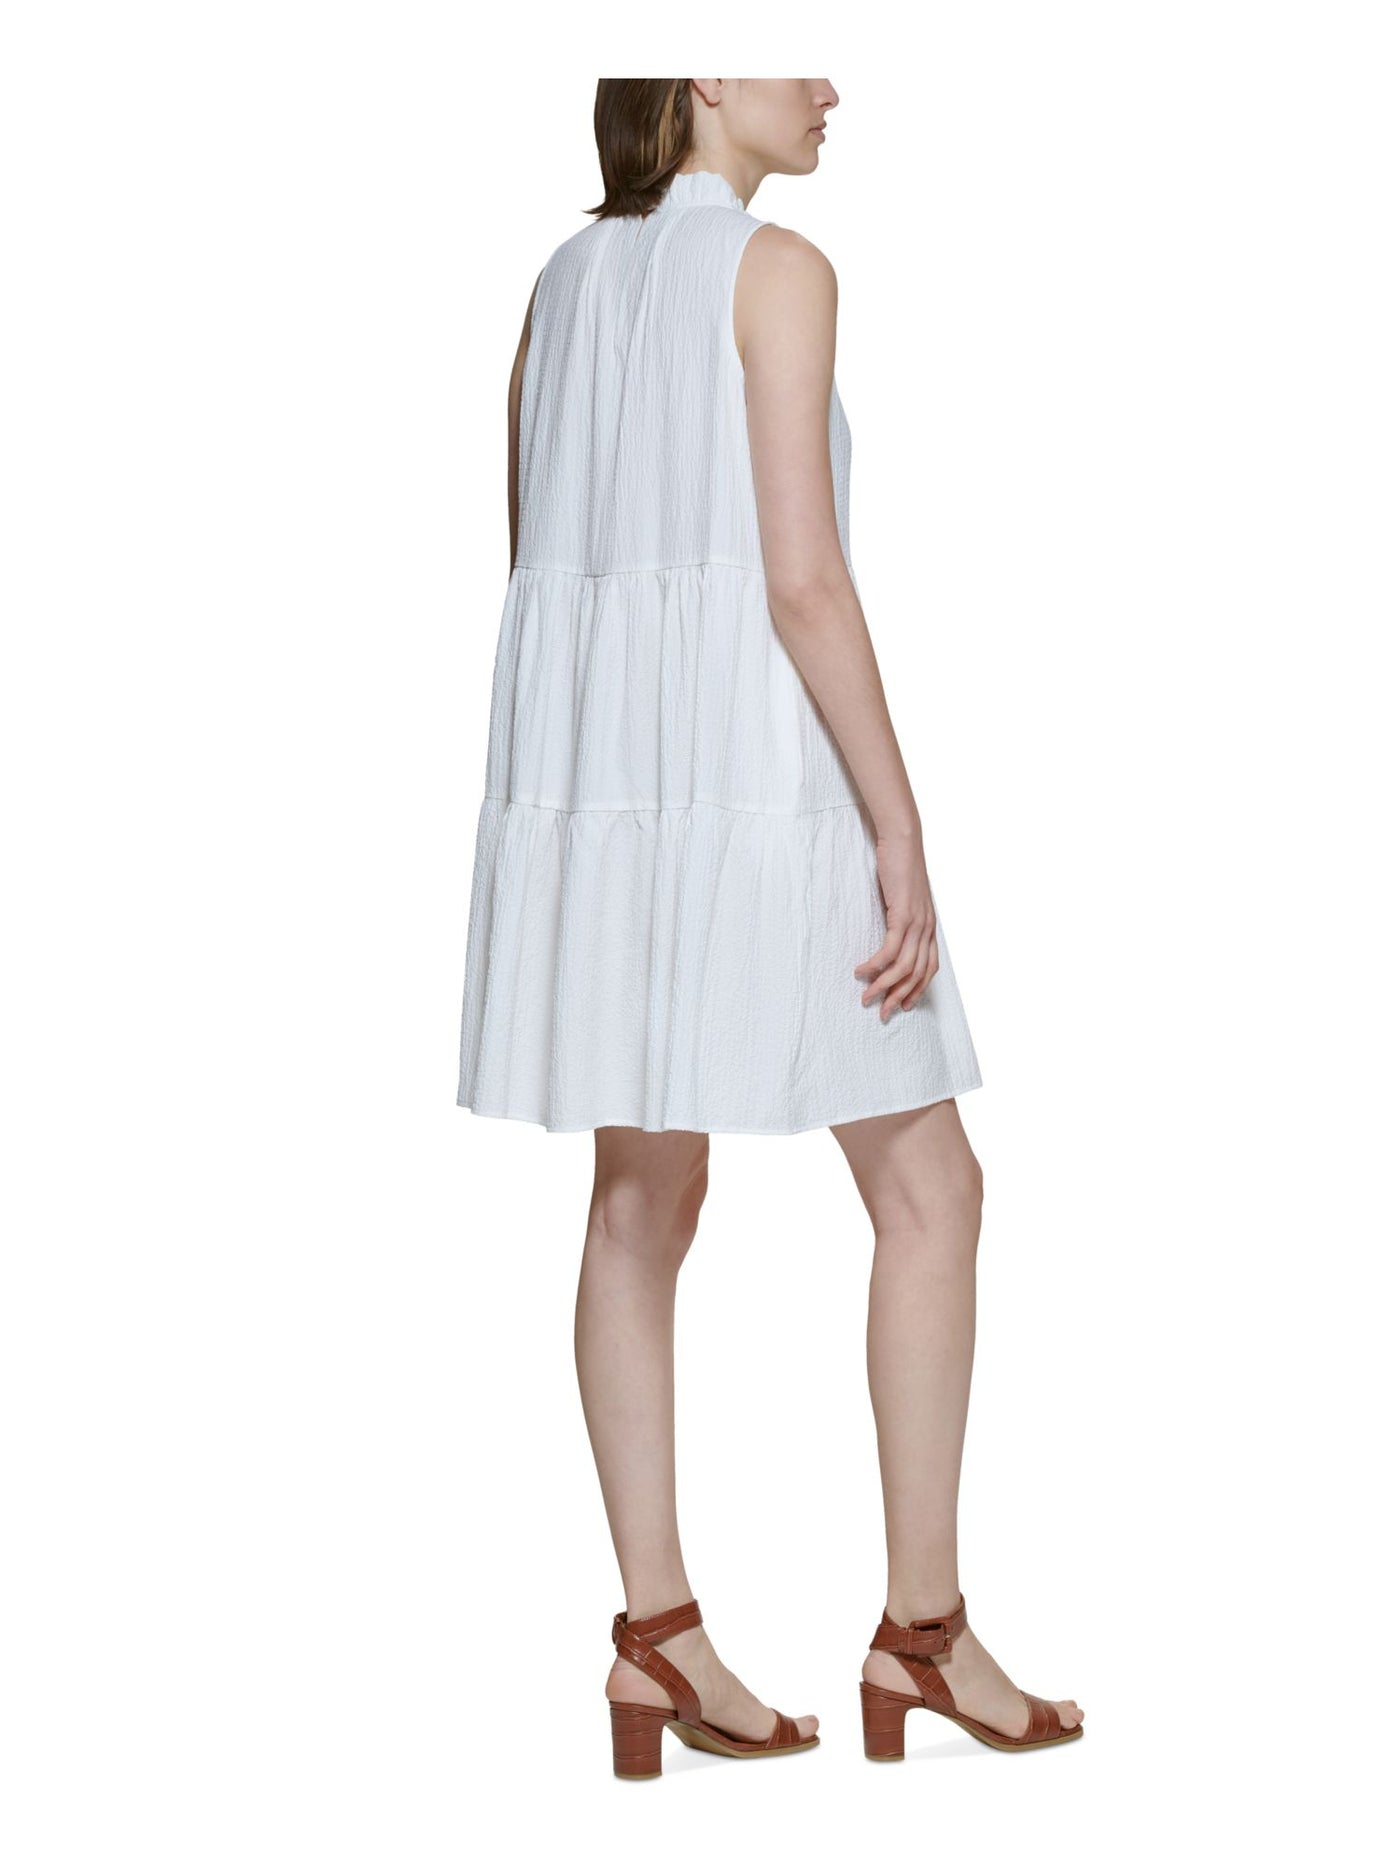 CALVIN KLEIN Womens Ivory Pocketed Ruffled Tiered Keyhole Button Back Sleeveless Mock Neck Above The Knee Fit + Flare Dress 14